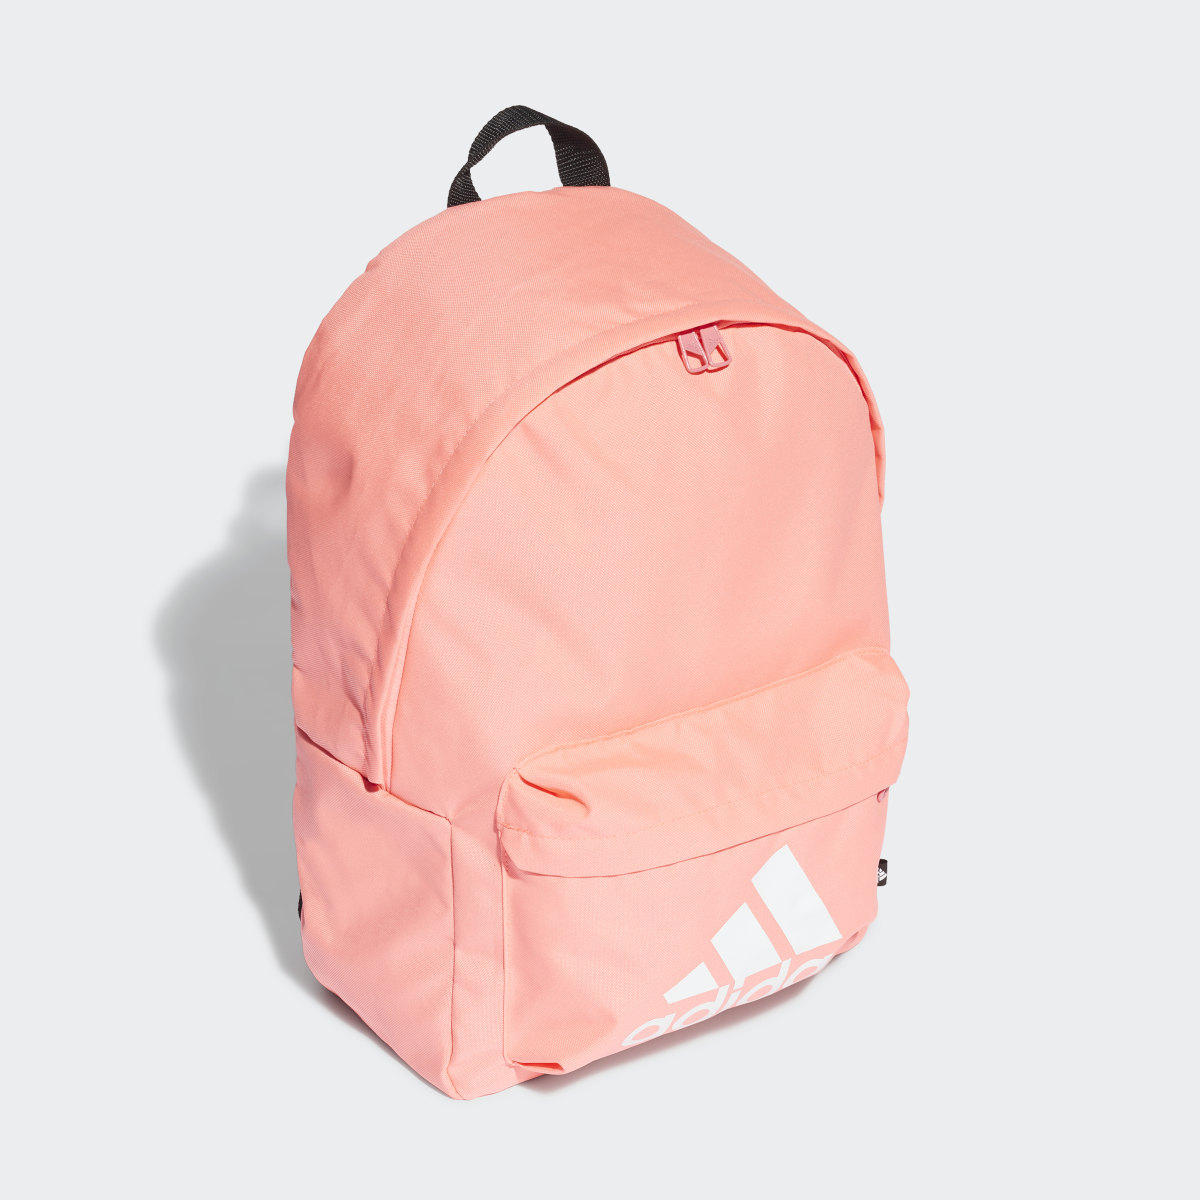 Adidas Classic Badge of Sport Backpack. 4